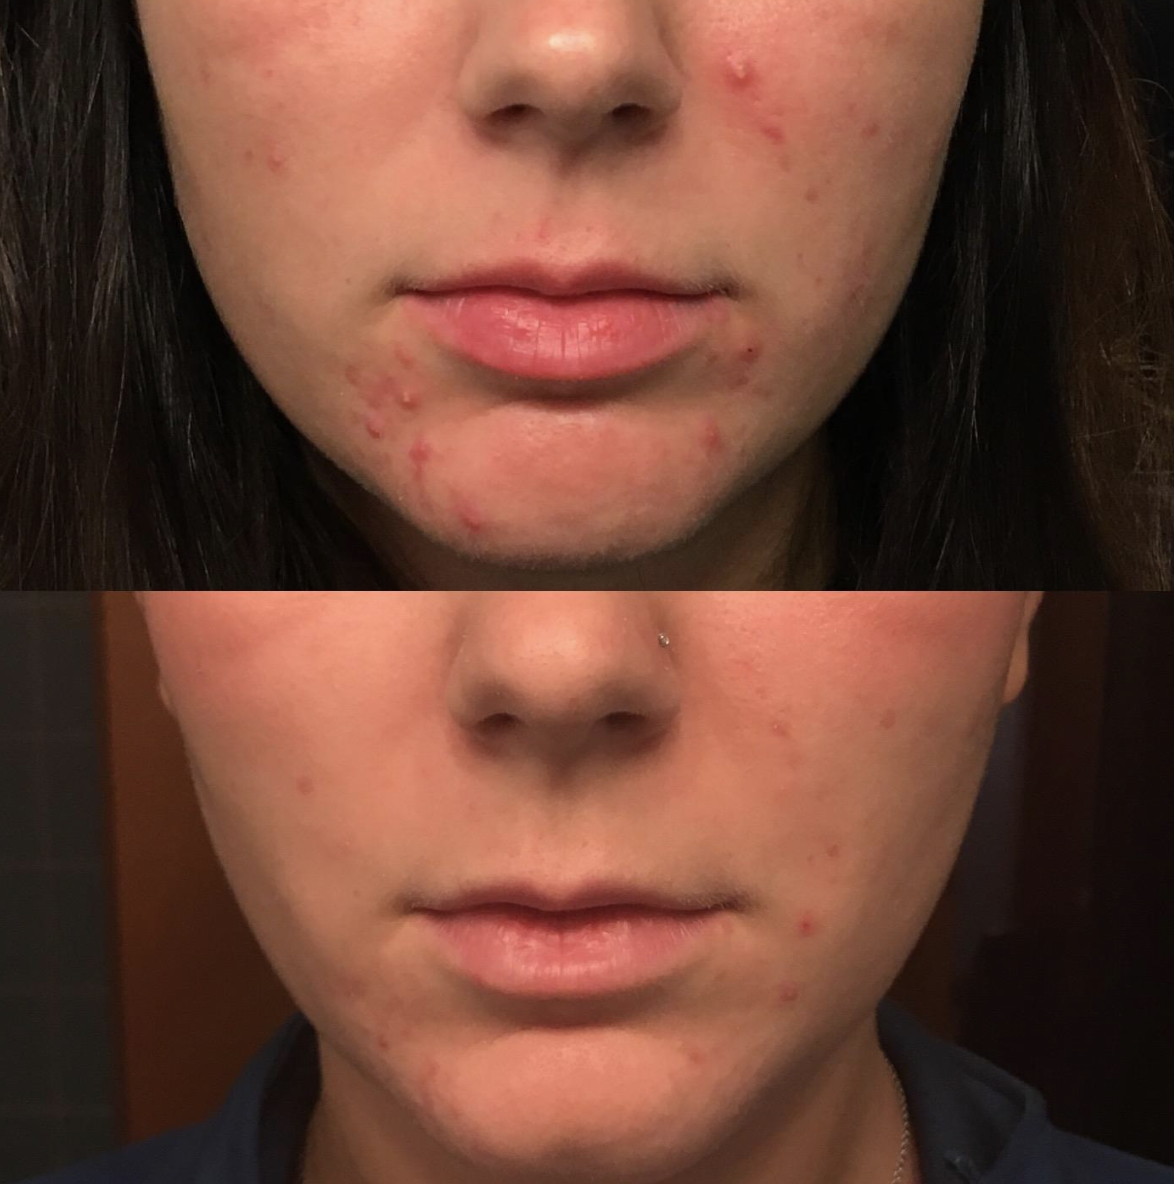 Before and after comparison of a person&#x27;s skin treatment with visible improvement in acne